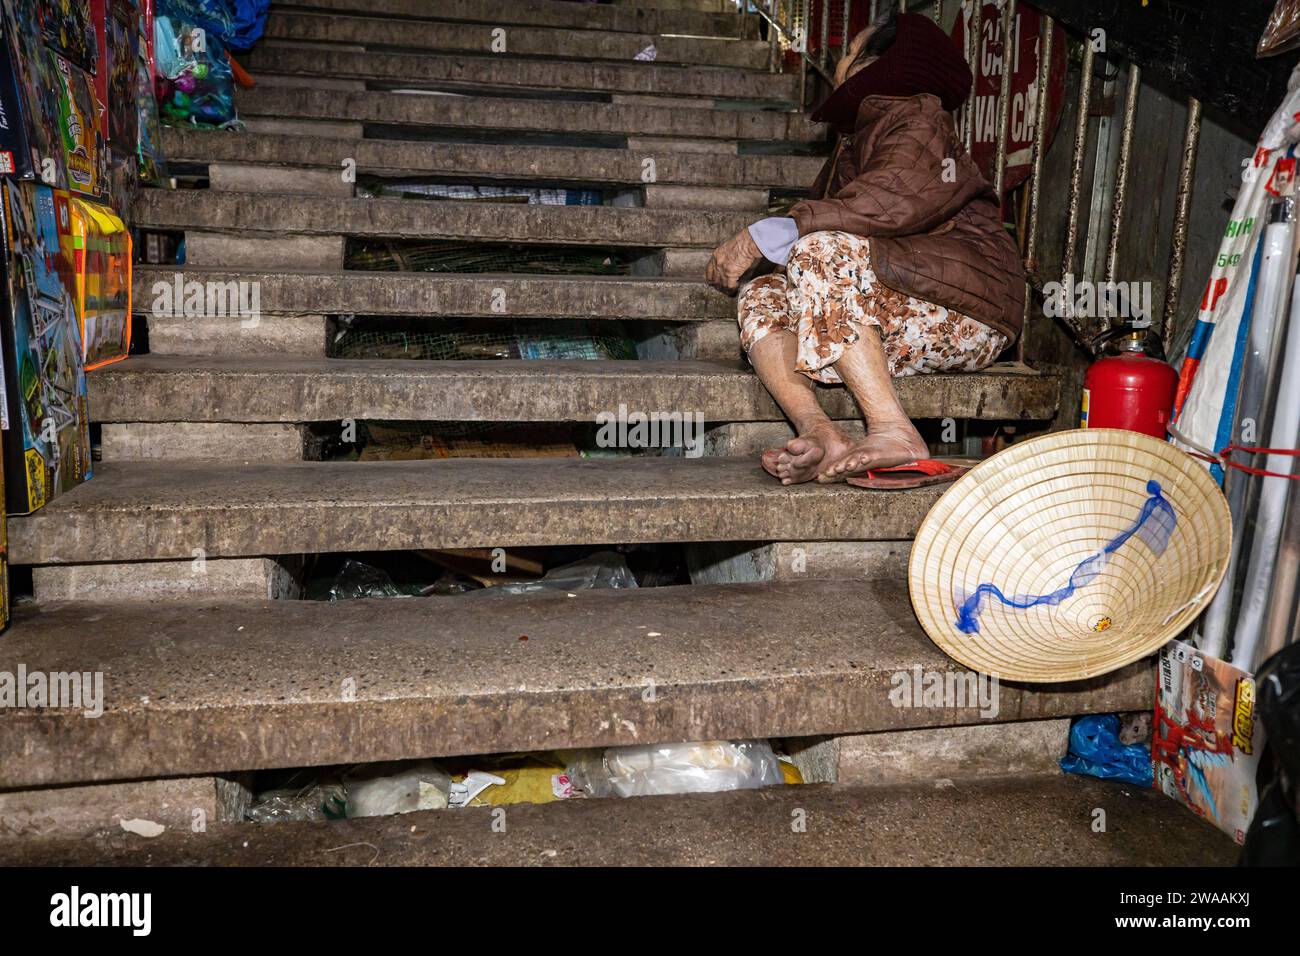 Poverty and poor people in Vietnam Stock Photo